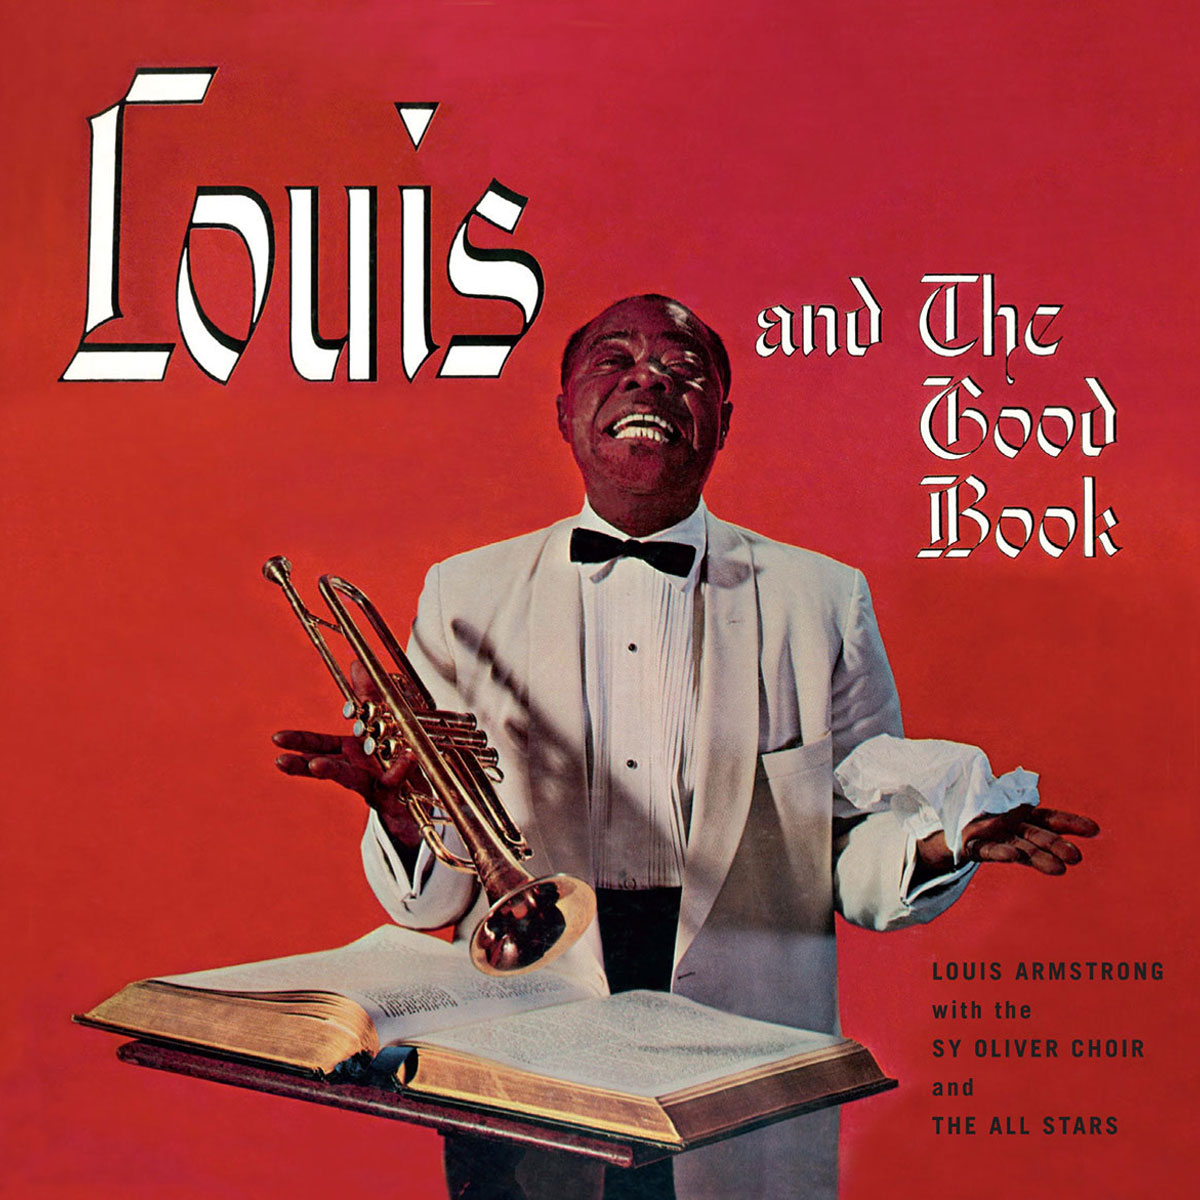 Louis Armstrong And The Good Book + Louis And The Angels